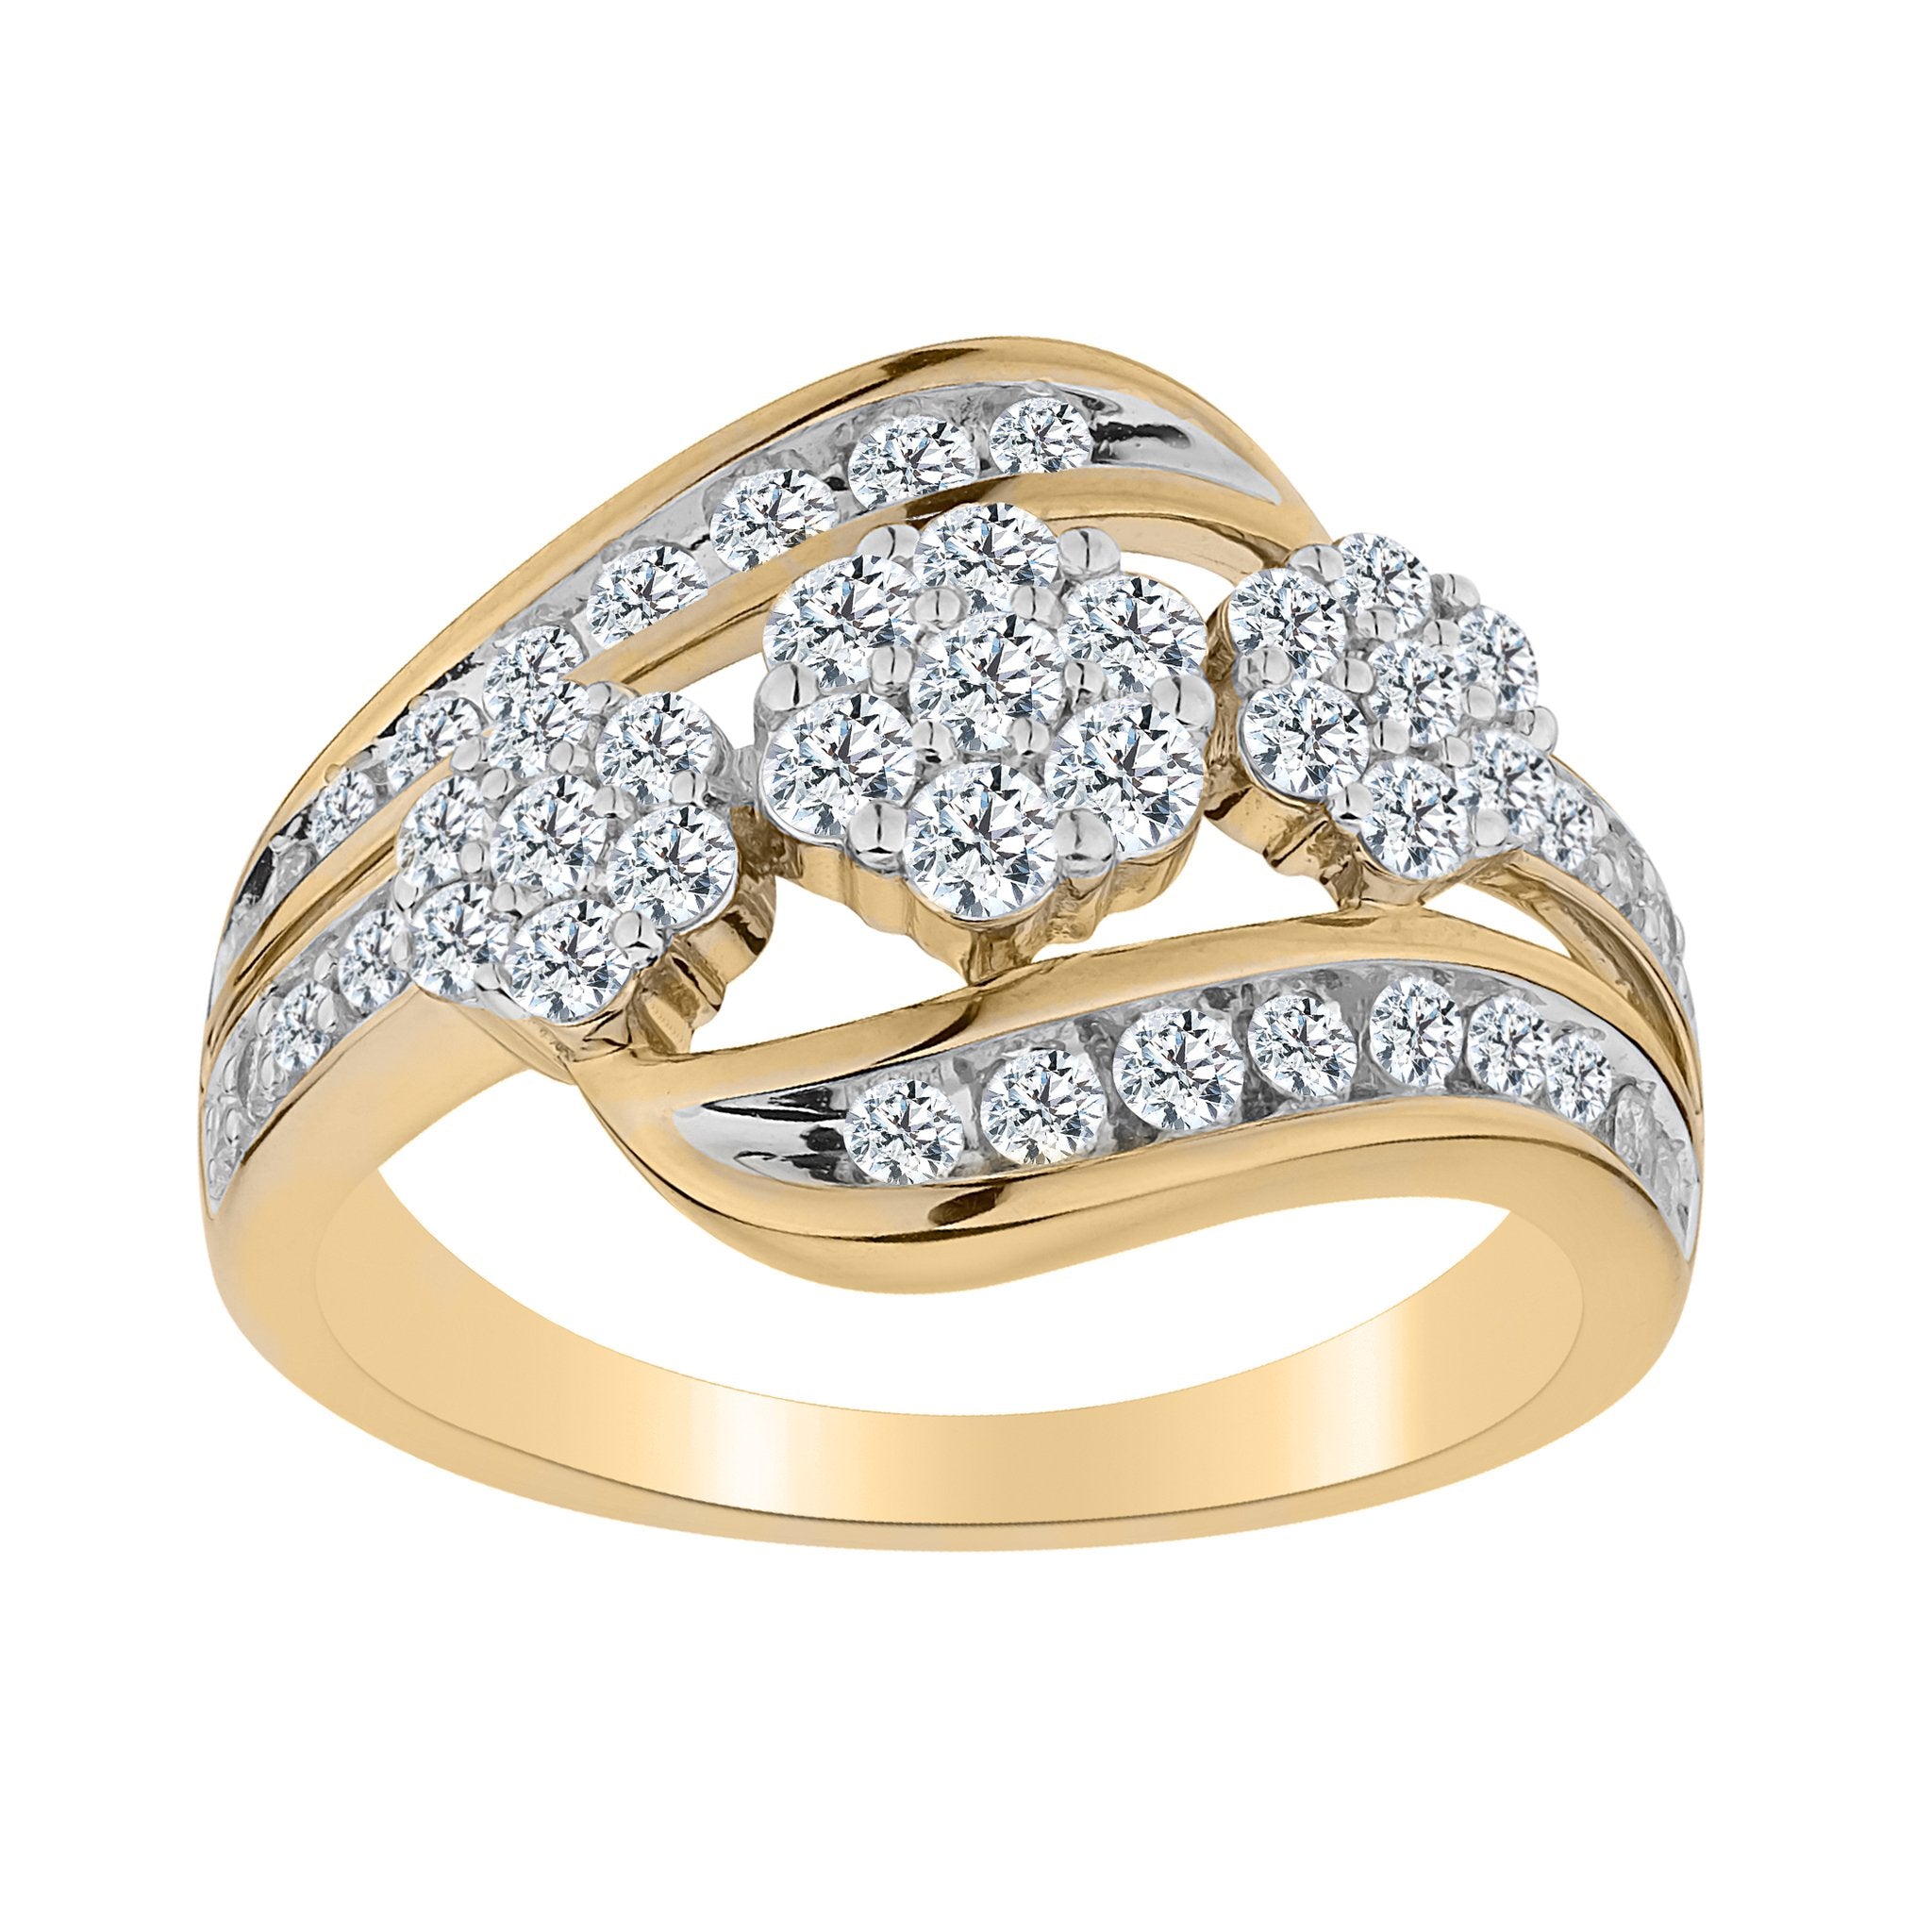 1.00 CARAT DIAMOND "PAST, PRESENT, FUTURE" RING, 10kt YELLOW GOLD....................NOW - Griffin Jewellery Designs